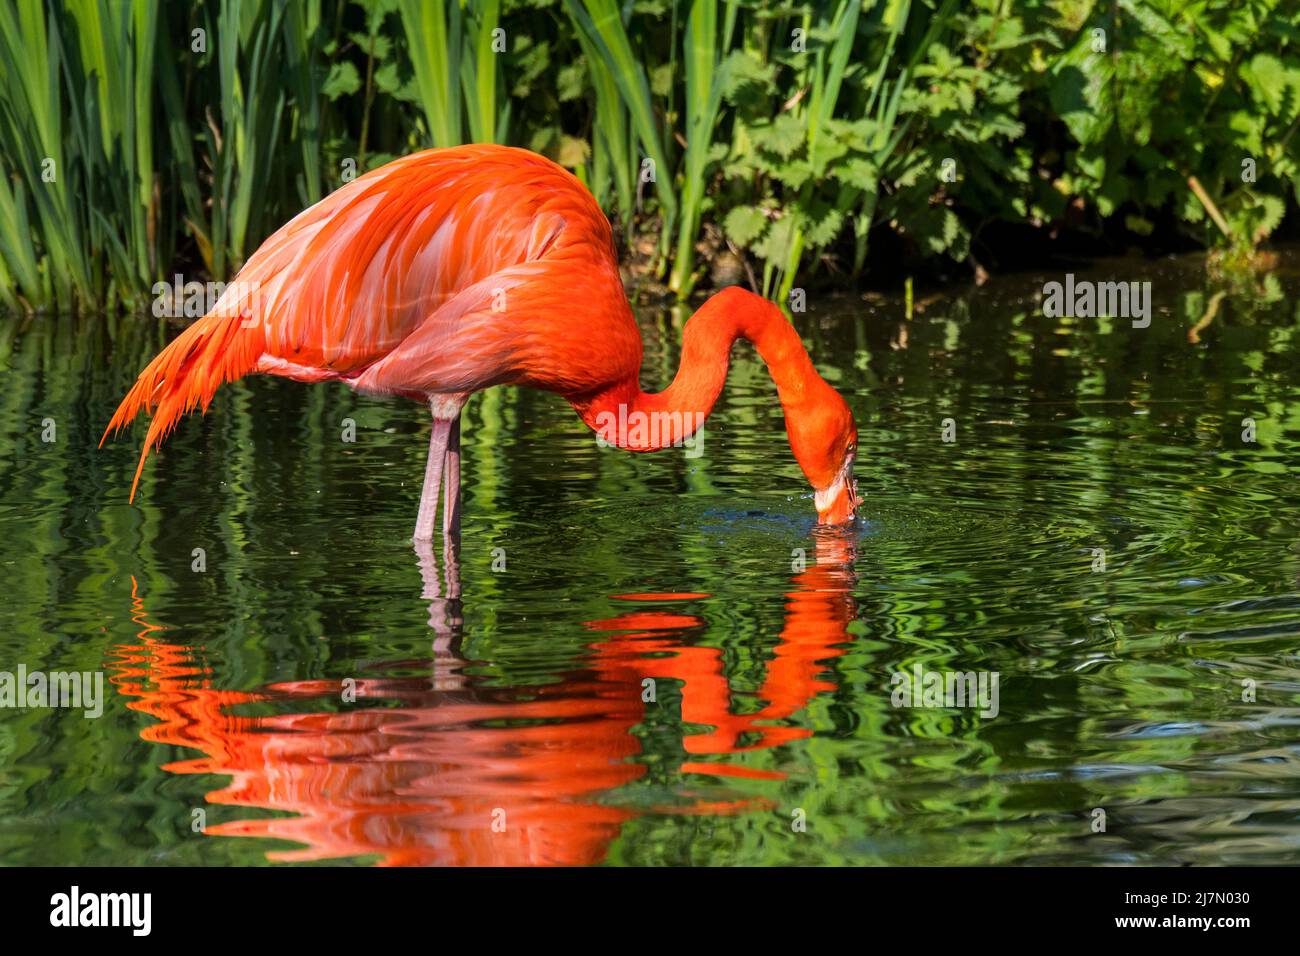 American flamingo / Cuban flamingo / Caribbean flamingo (Phoenicopterus ruber) foraging in pond by filtering the water in their large beak Stock Photo